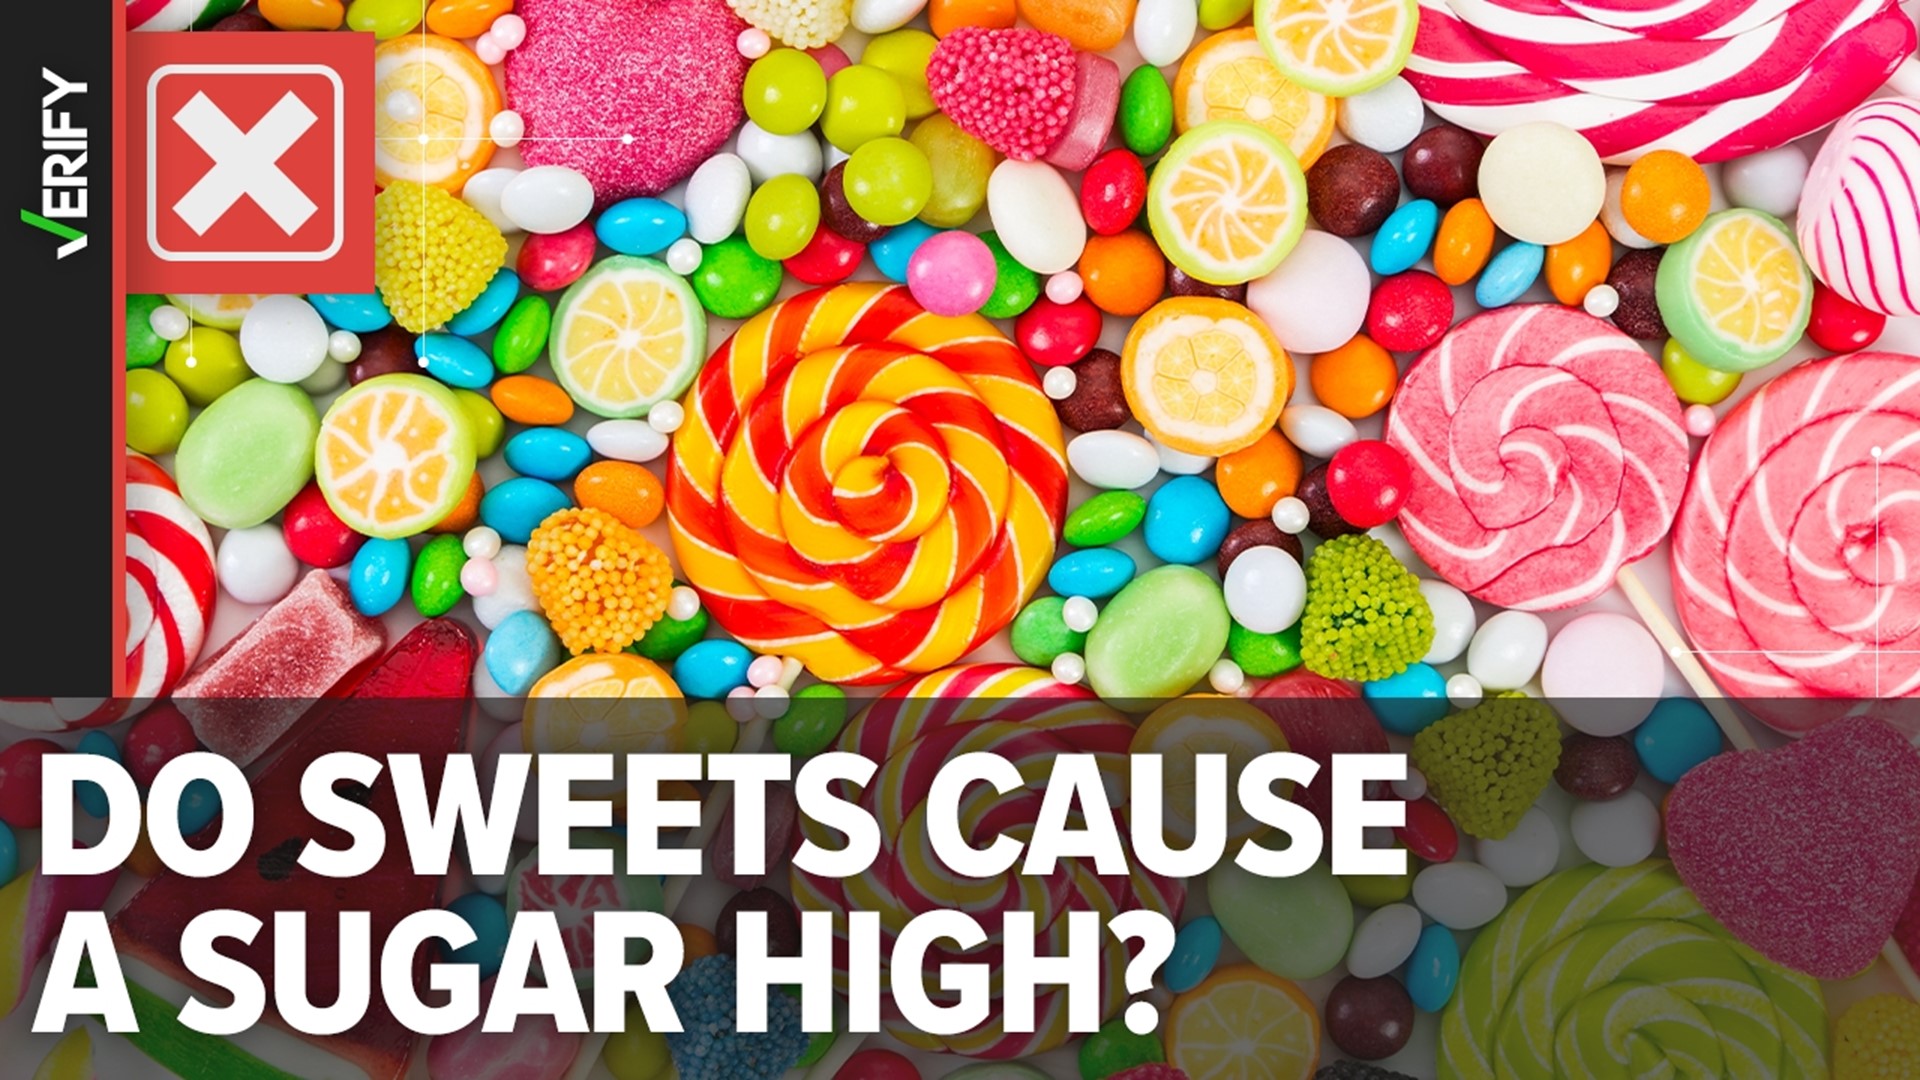 Kids don’t get hyper from a sugar rush after eating too much candy. Here’s what might actually cause the behavior.